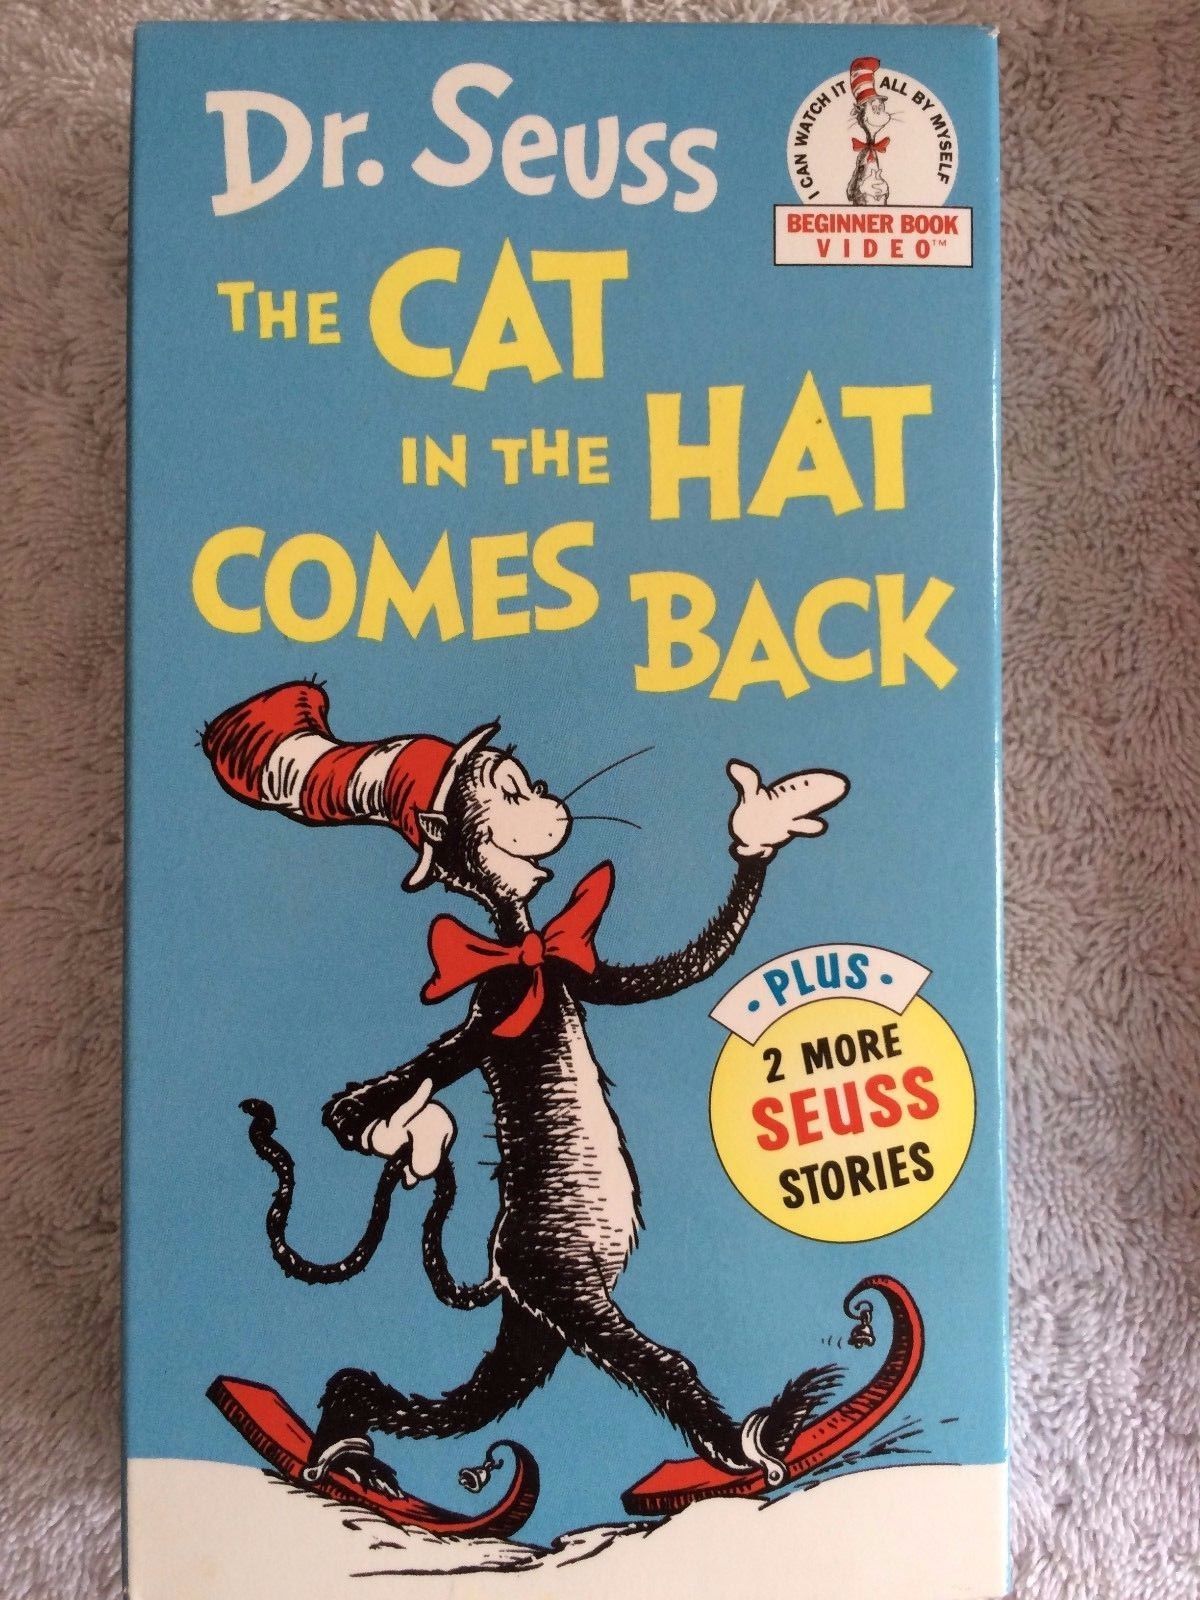 Image The Cat in the Hat Comes Back VHS.jpg Scratchpad FANDOM